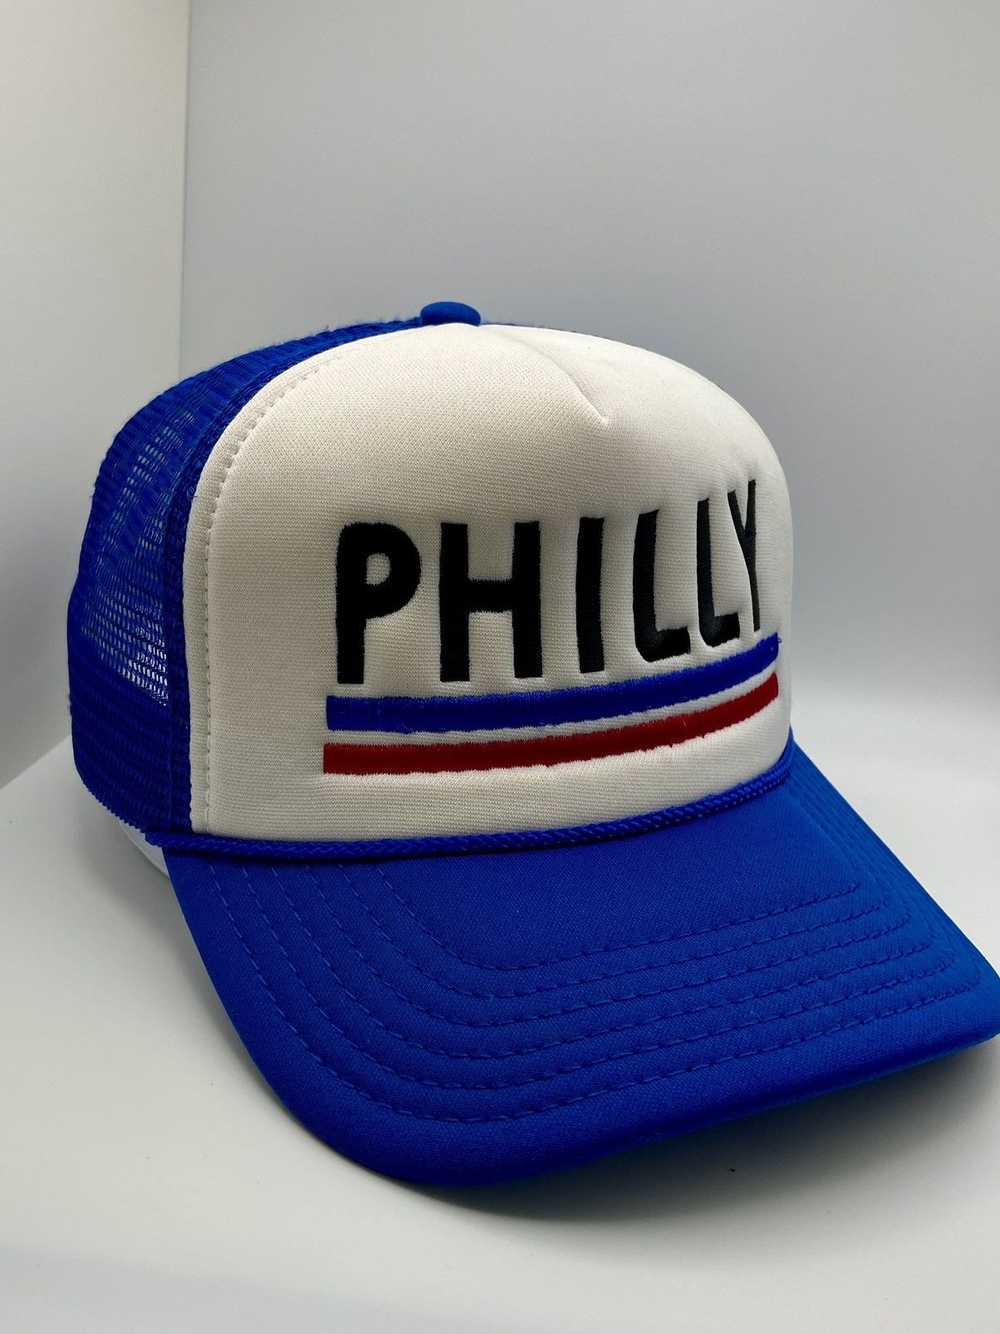 Other Trucker Hat - “Philly” - SnapBack Classic - image 2